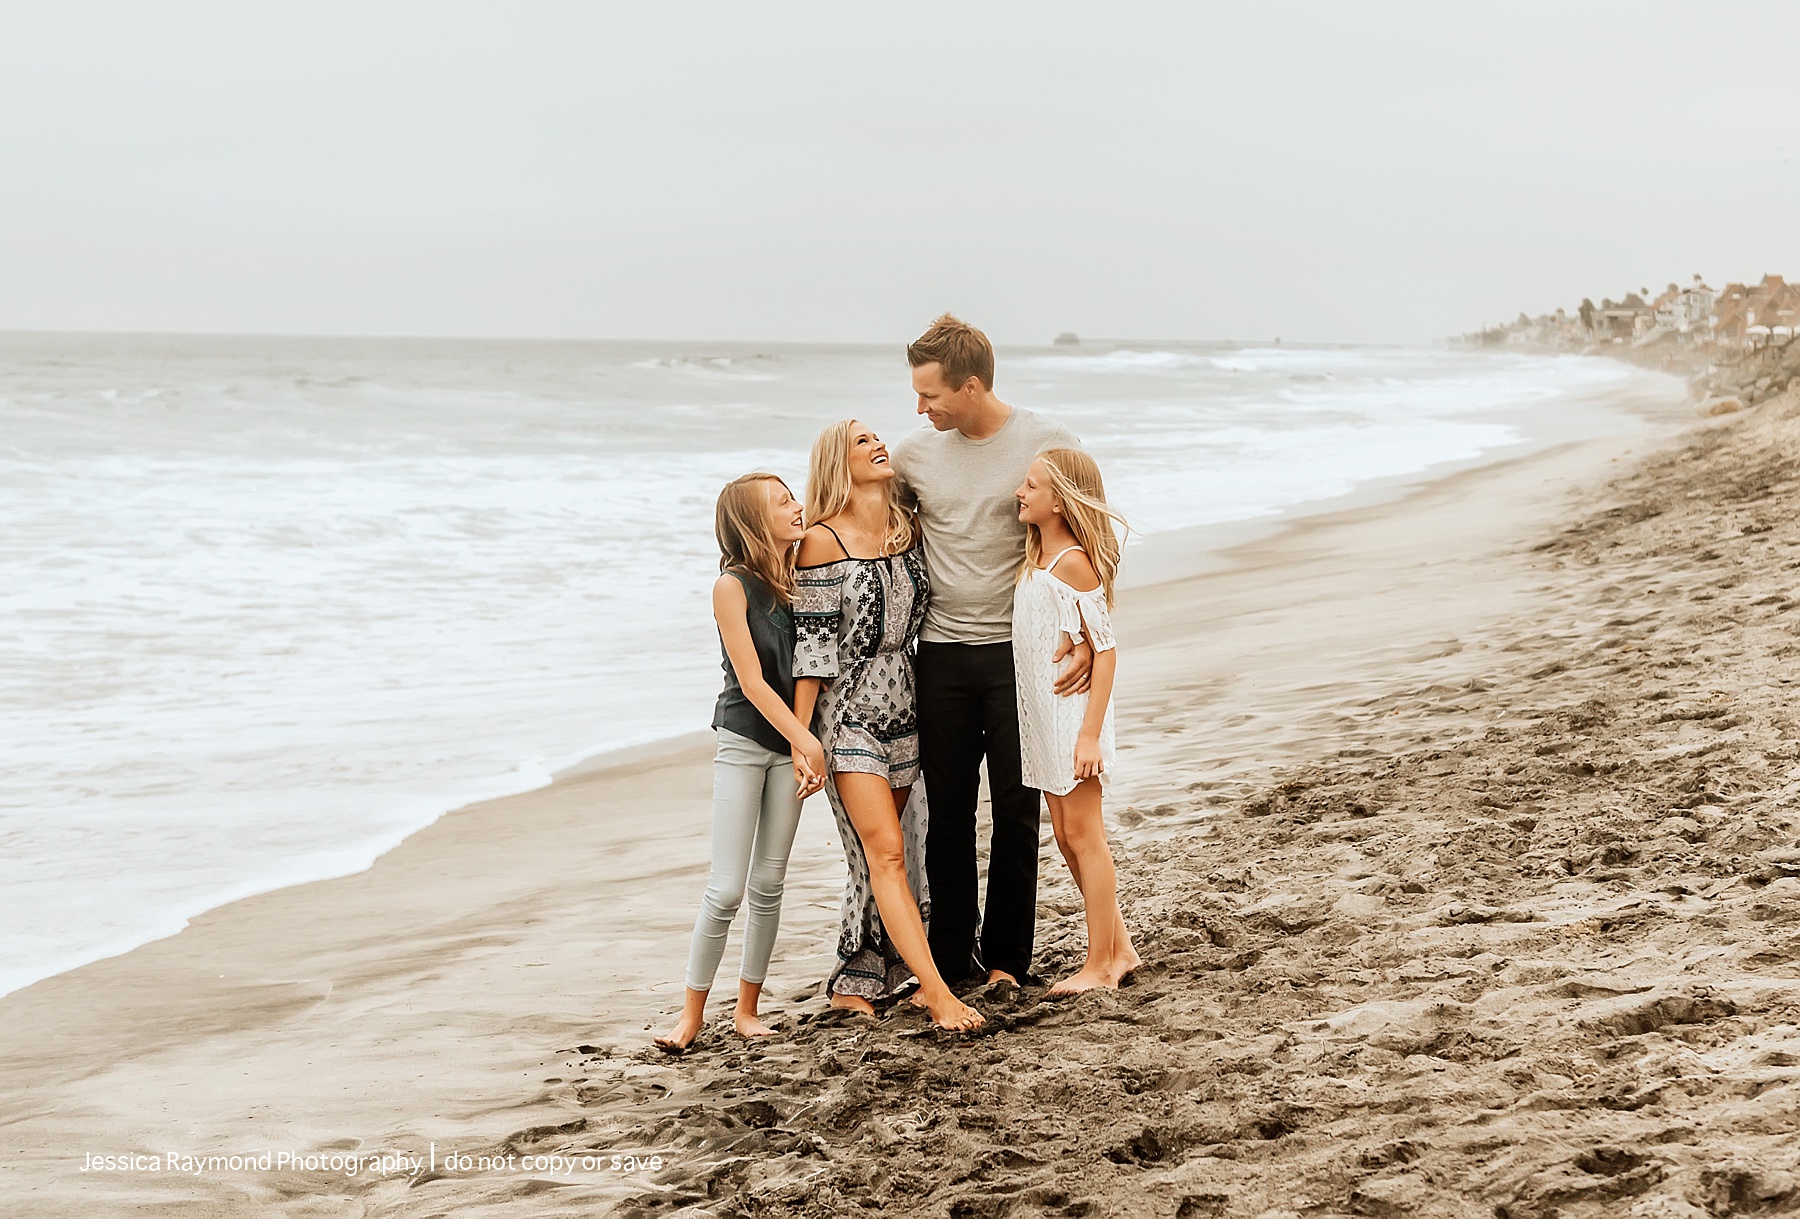 family of four photo ideas | Photography poses family, Family portrait poses,  Family picture poses